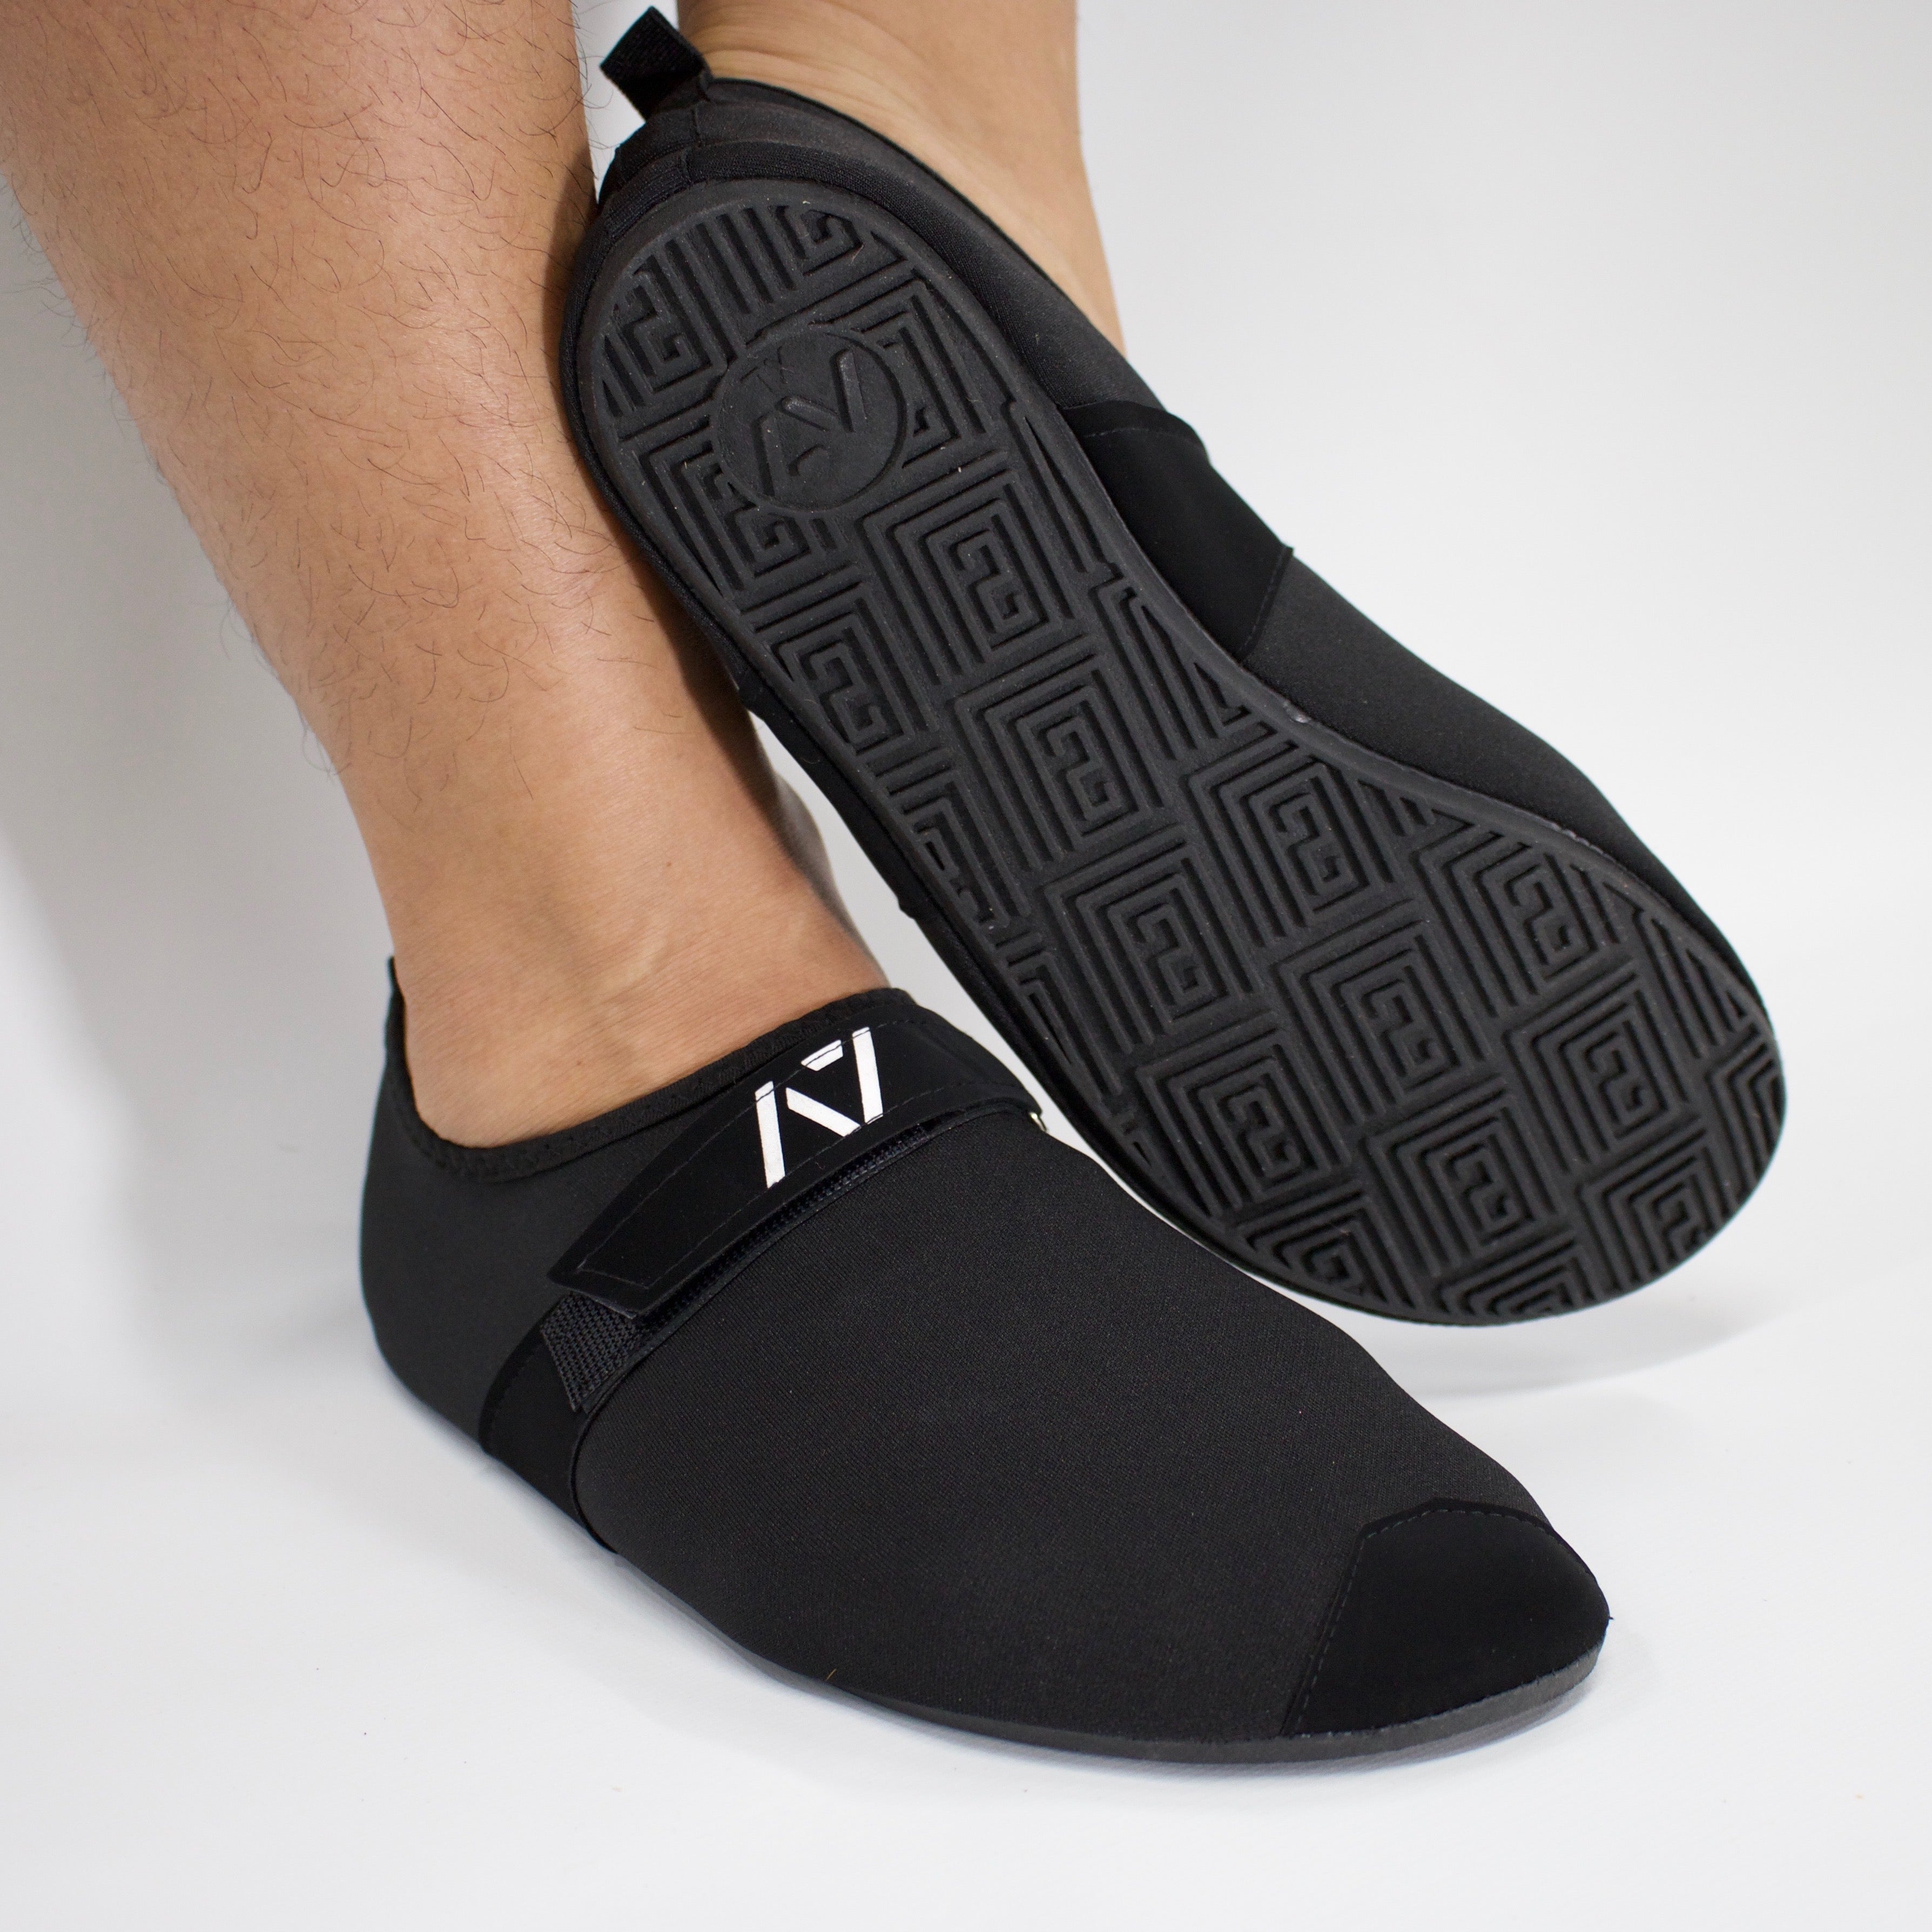 A7 Soul Go Slippers | Slip-On Powerlifting Slippers | A7